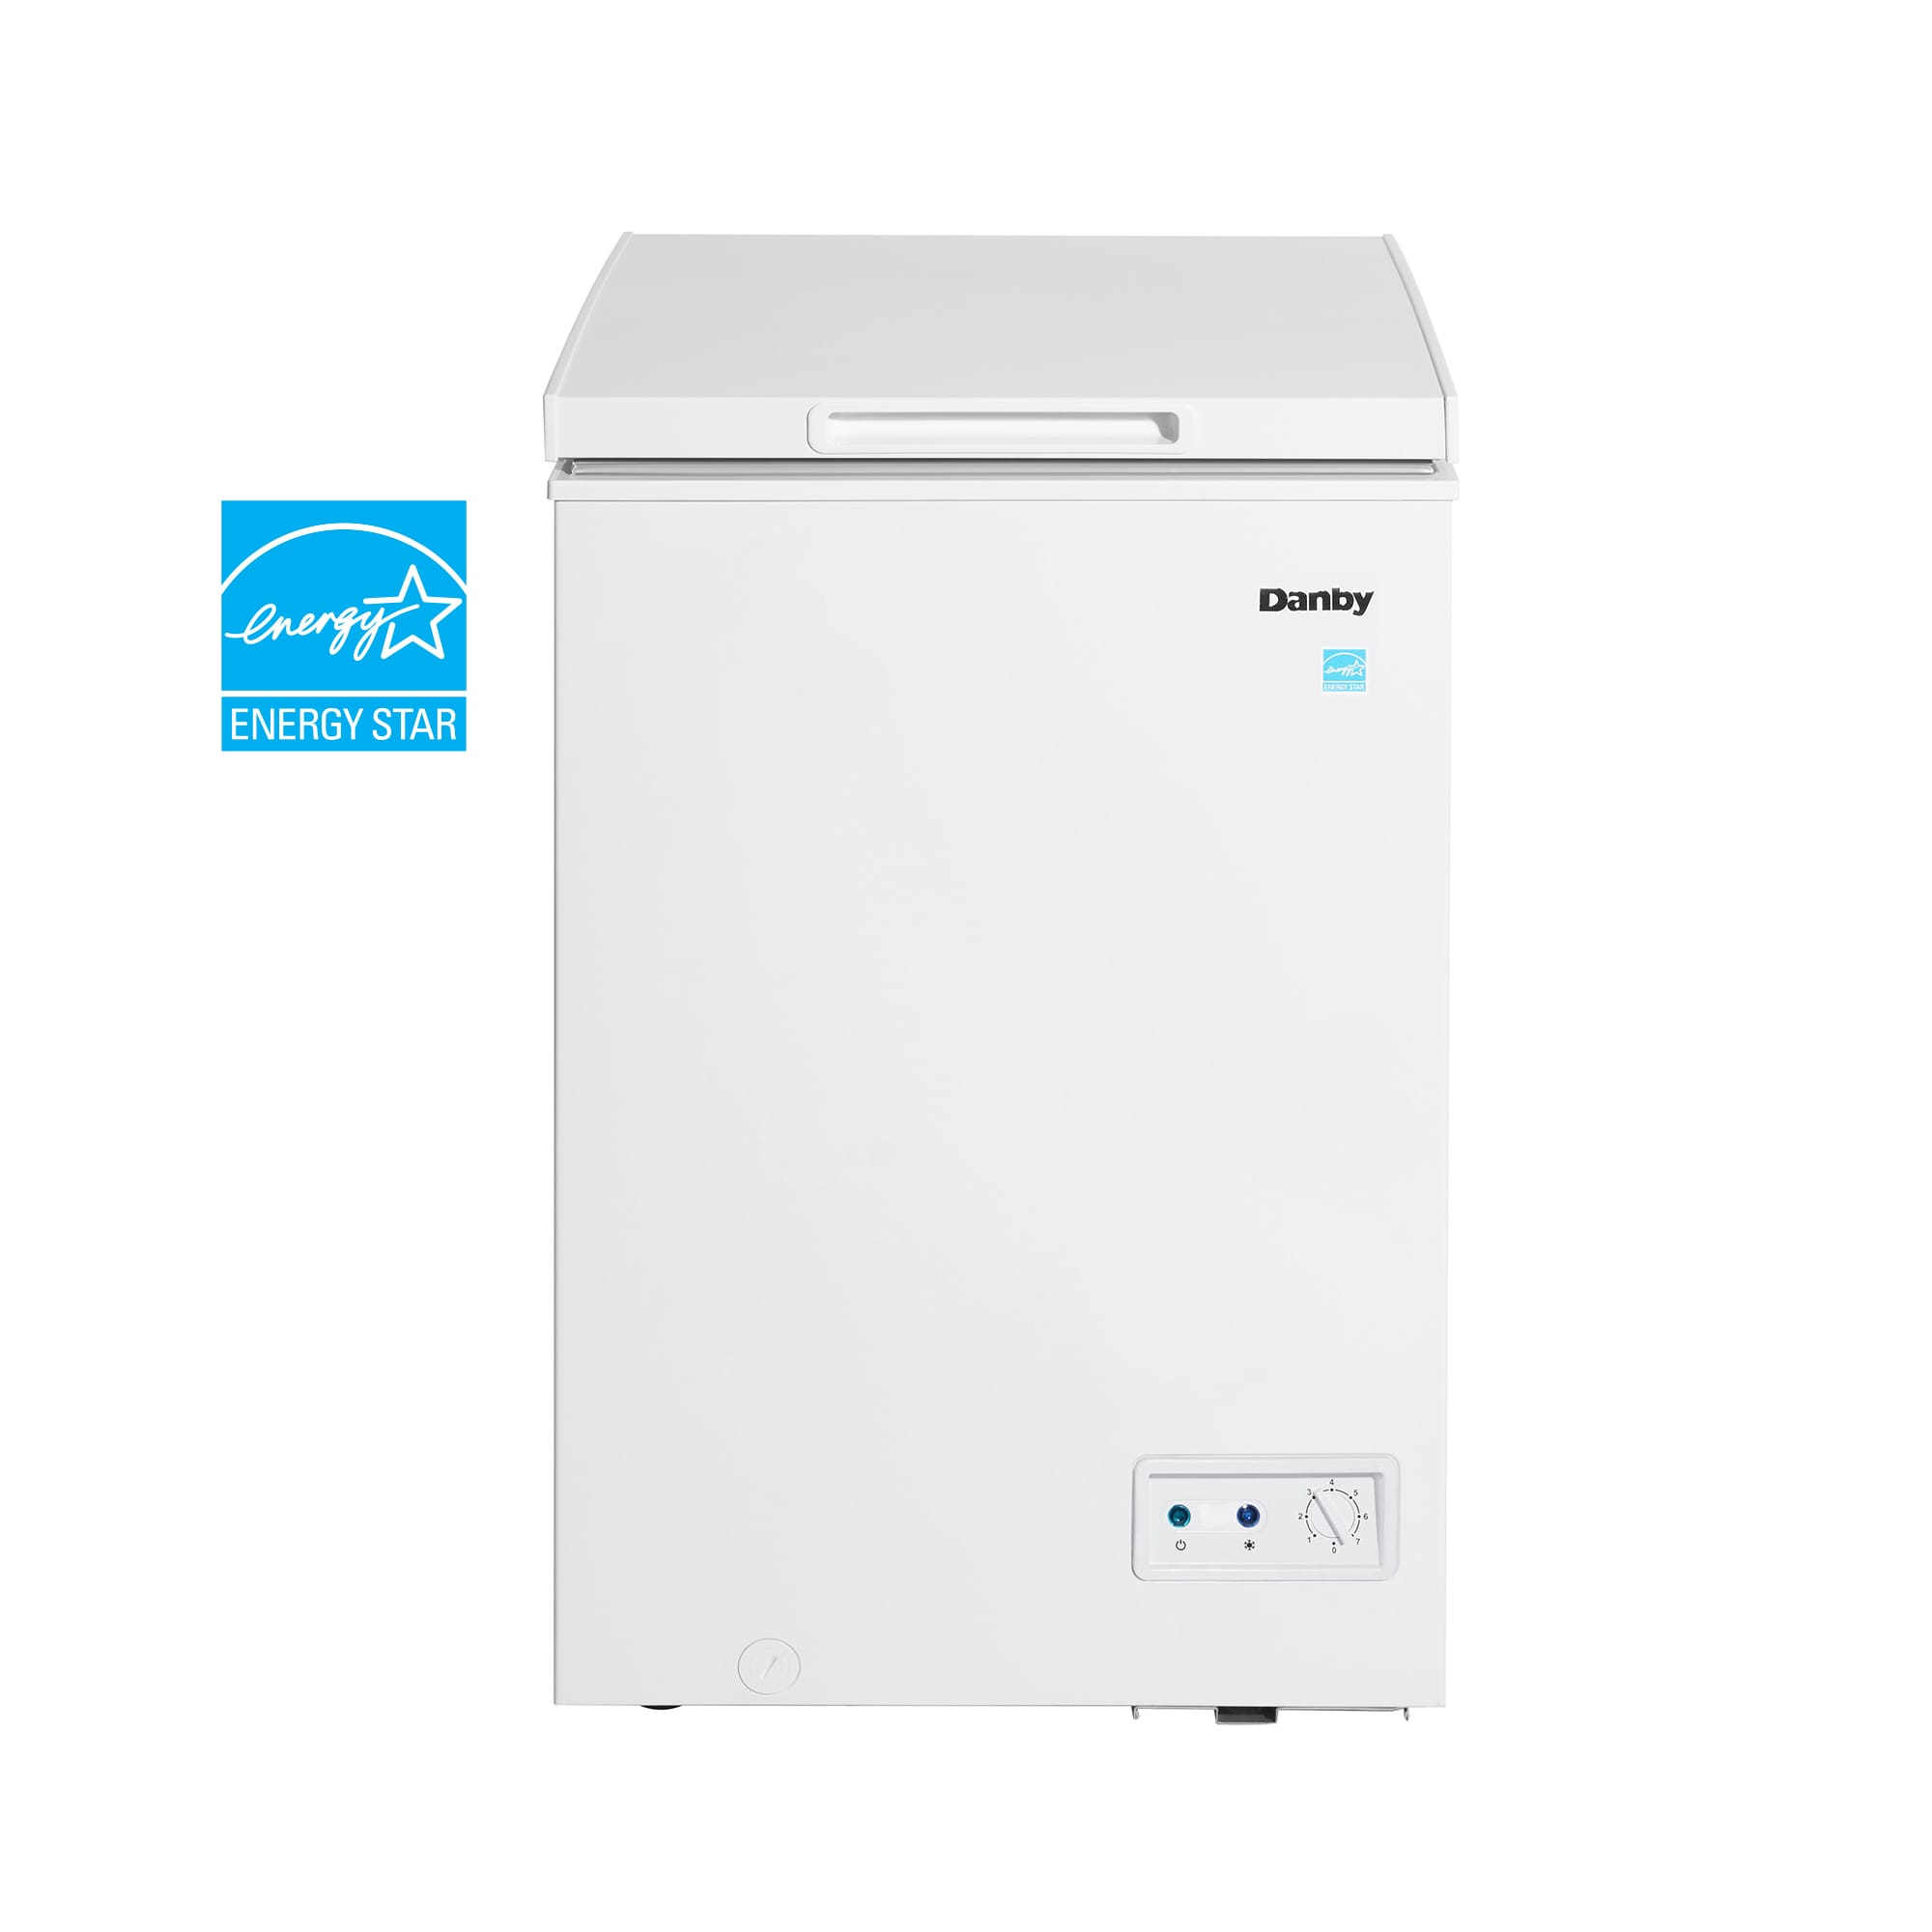 Haier 3.5-cu ft Manual Defrost Chest Freezer (White) at